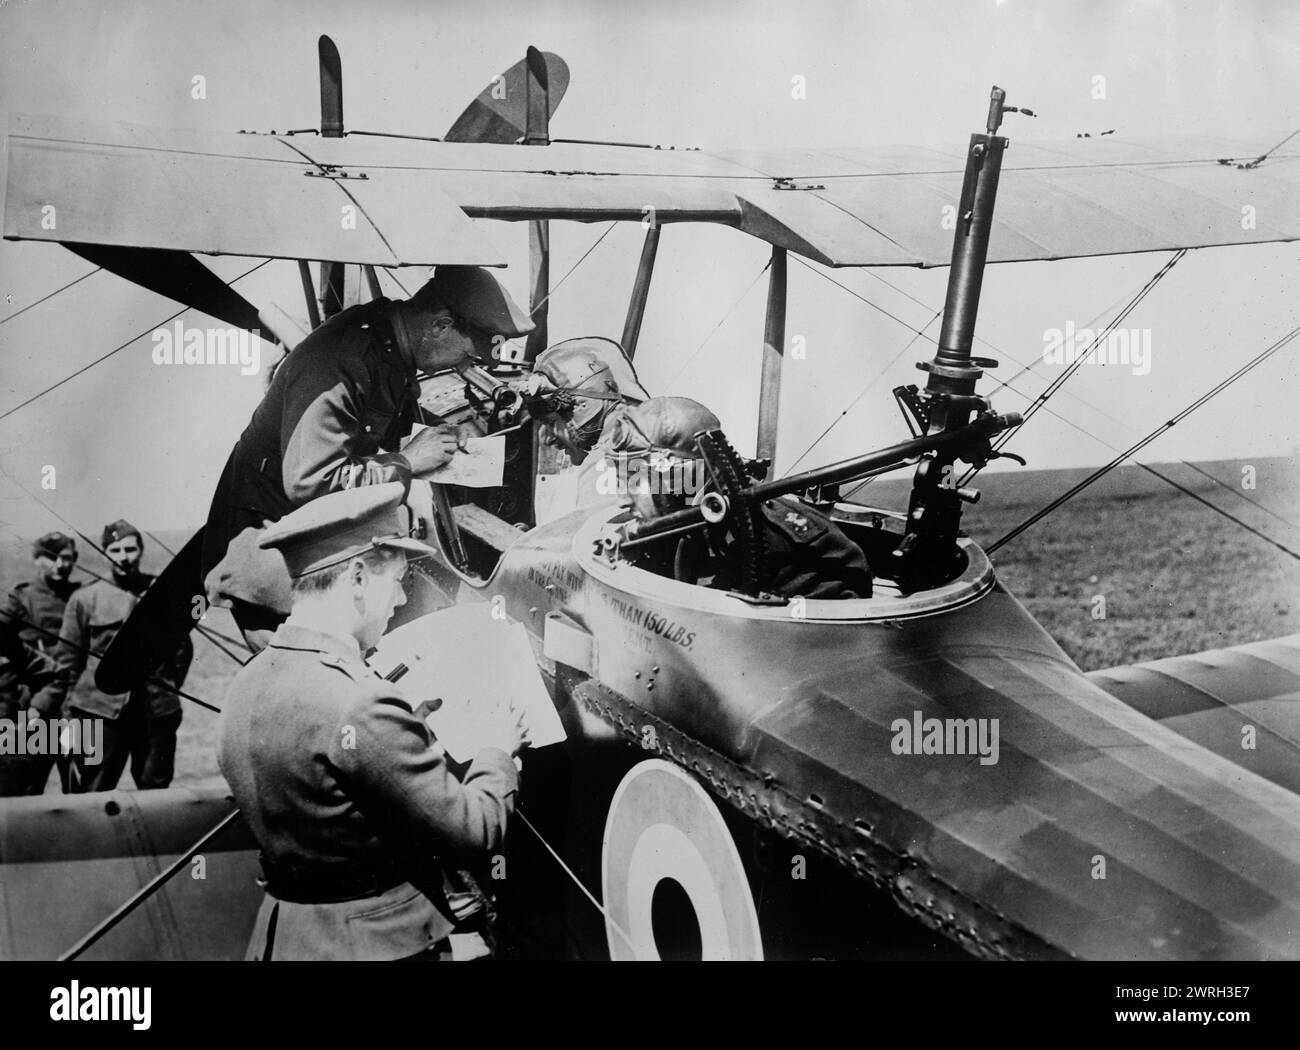 British aviators getting instructions, 15 May 1918. The pilot and observer of a Royal Aircraft Factory R.E.8 biplane (serial number B5106) of No. 59 Squadron receiving instructions from Major Charles Jospeh Mackay before taking off from the Vert-Galland Aerodrome, France, May 15, 1918. The observer's Lewis gun is on a Scarff ring. Stock Photo